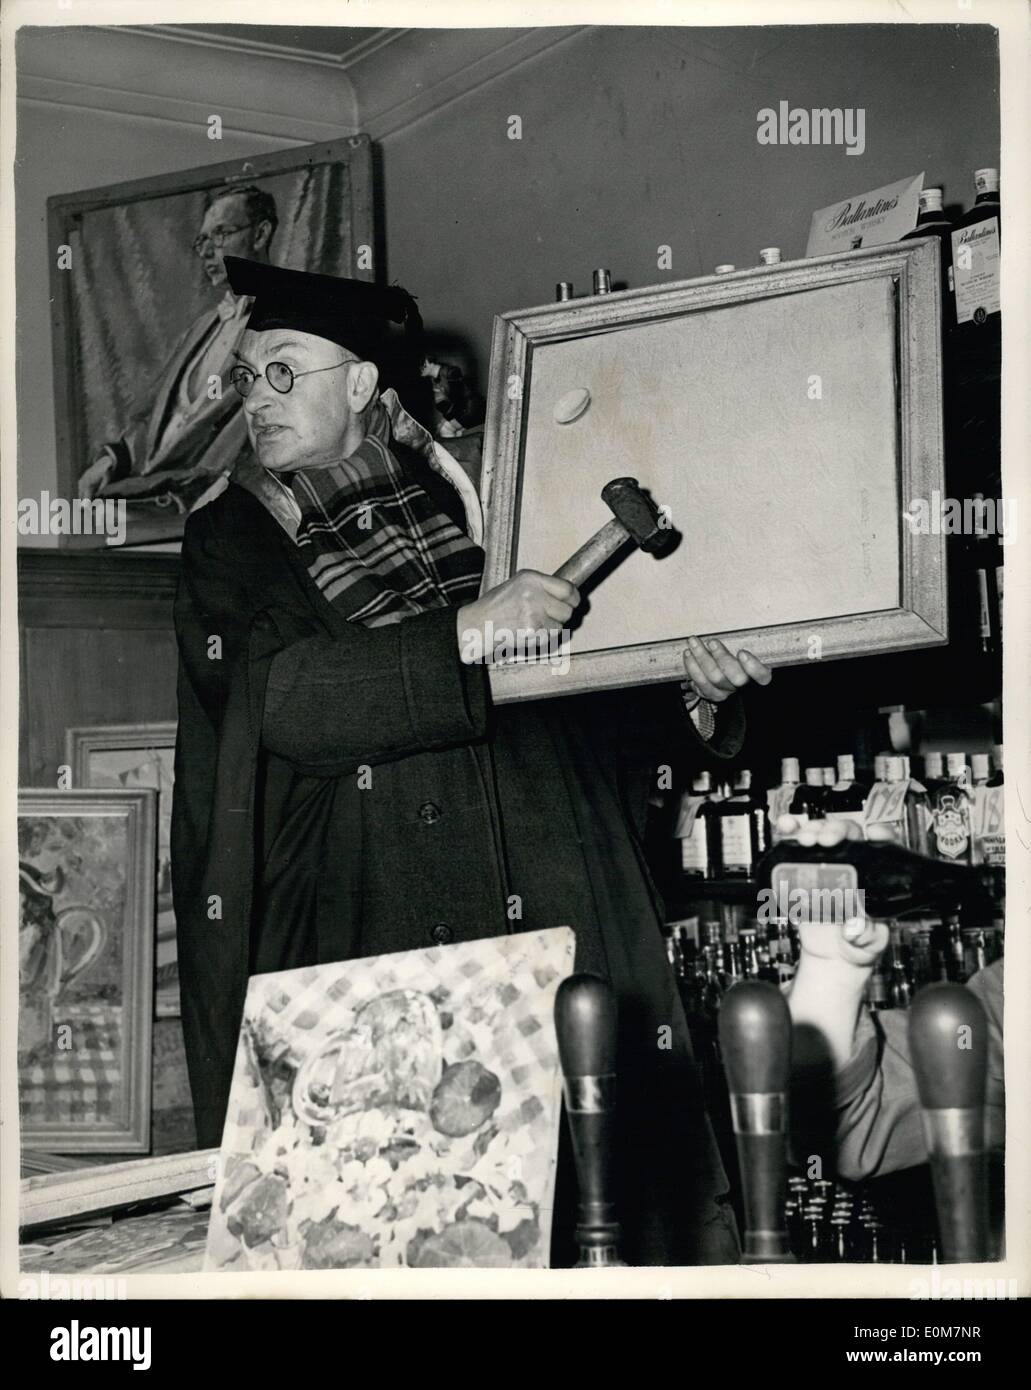 Jan. 01, 1954 - The ''World's Most Rejected Artist'' Holds Auction of His 'Masterpieces' In A London Public House.. Mr. Albert Perry who terms himself as the ''world's most rejected artist'' - held an auction of some of his paintings - at ''The Castle'' Public House, Tooting, London.. Keystone Photo Shows:- Mr. Perry seen auctioning ''Damask'' an egg study, which he says is one of his finest works. Stock Photo